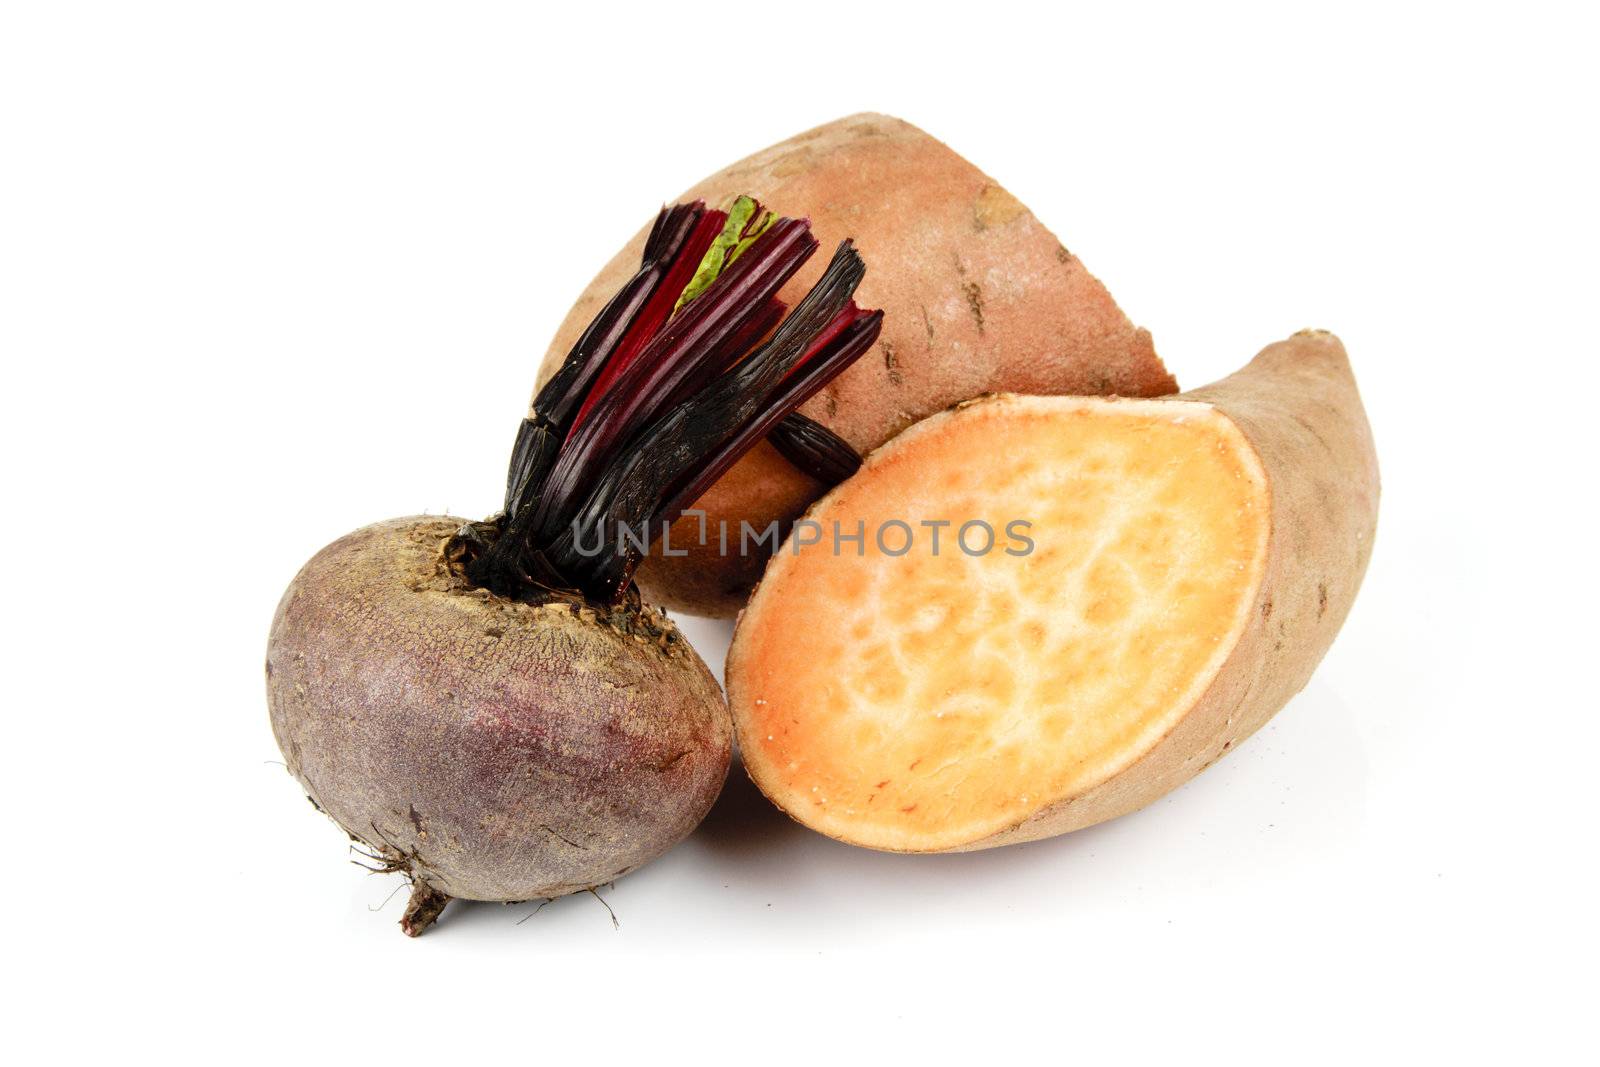 Sweet Potato cut in half with a small uncooked beetroot on a reflective white background